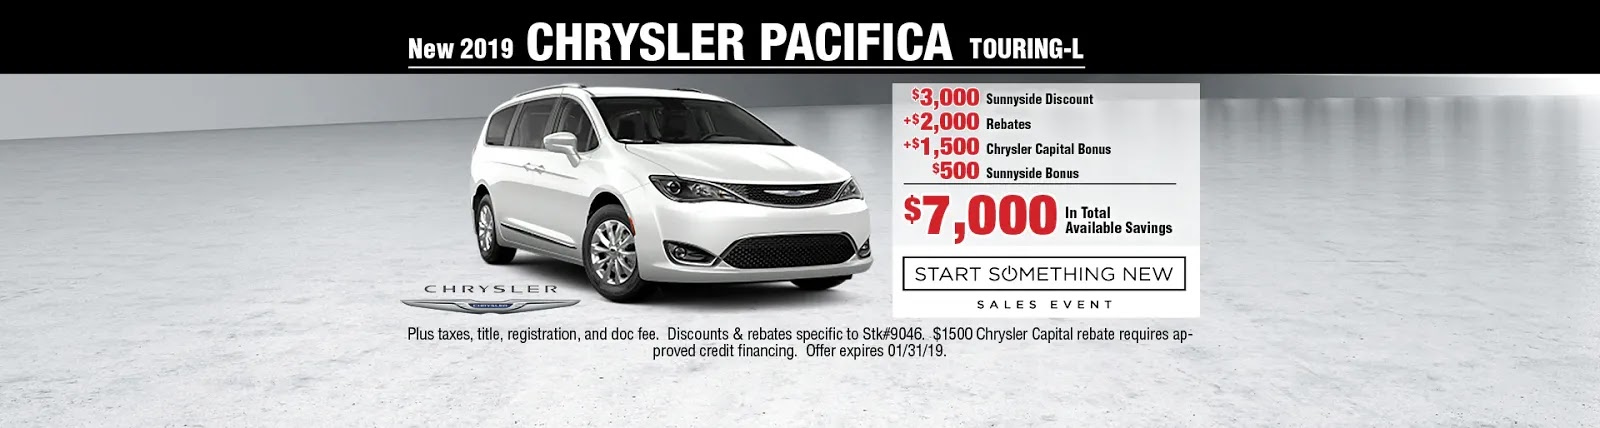 the-pacifica-place-at-criswell-chrysler-how-do-manufacturers-determine